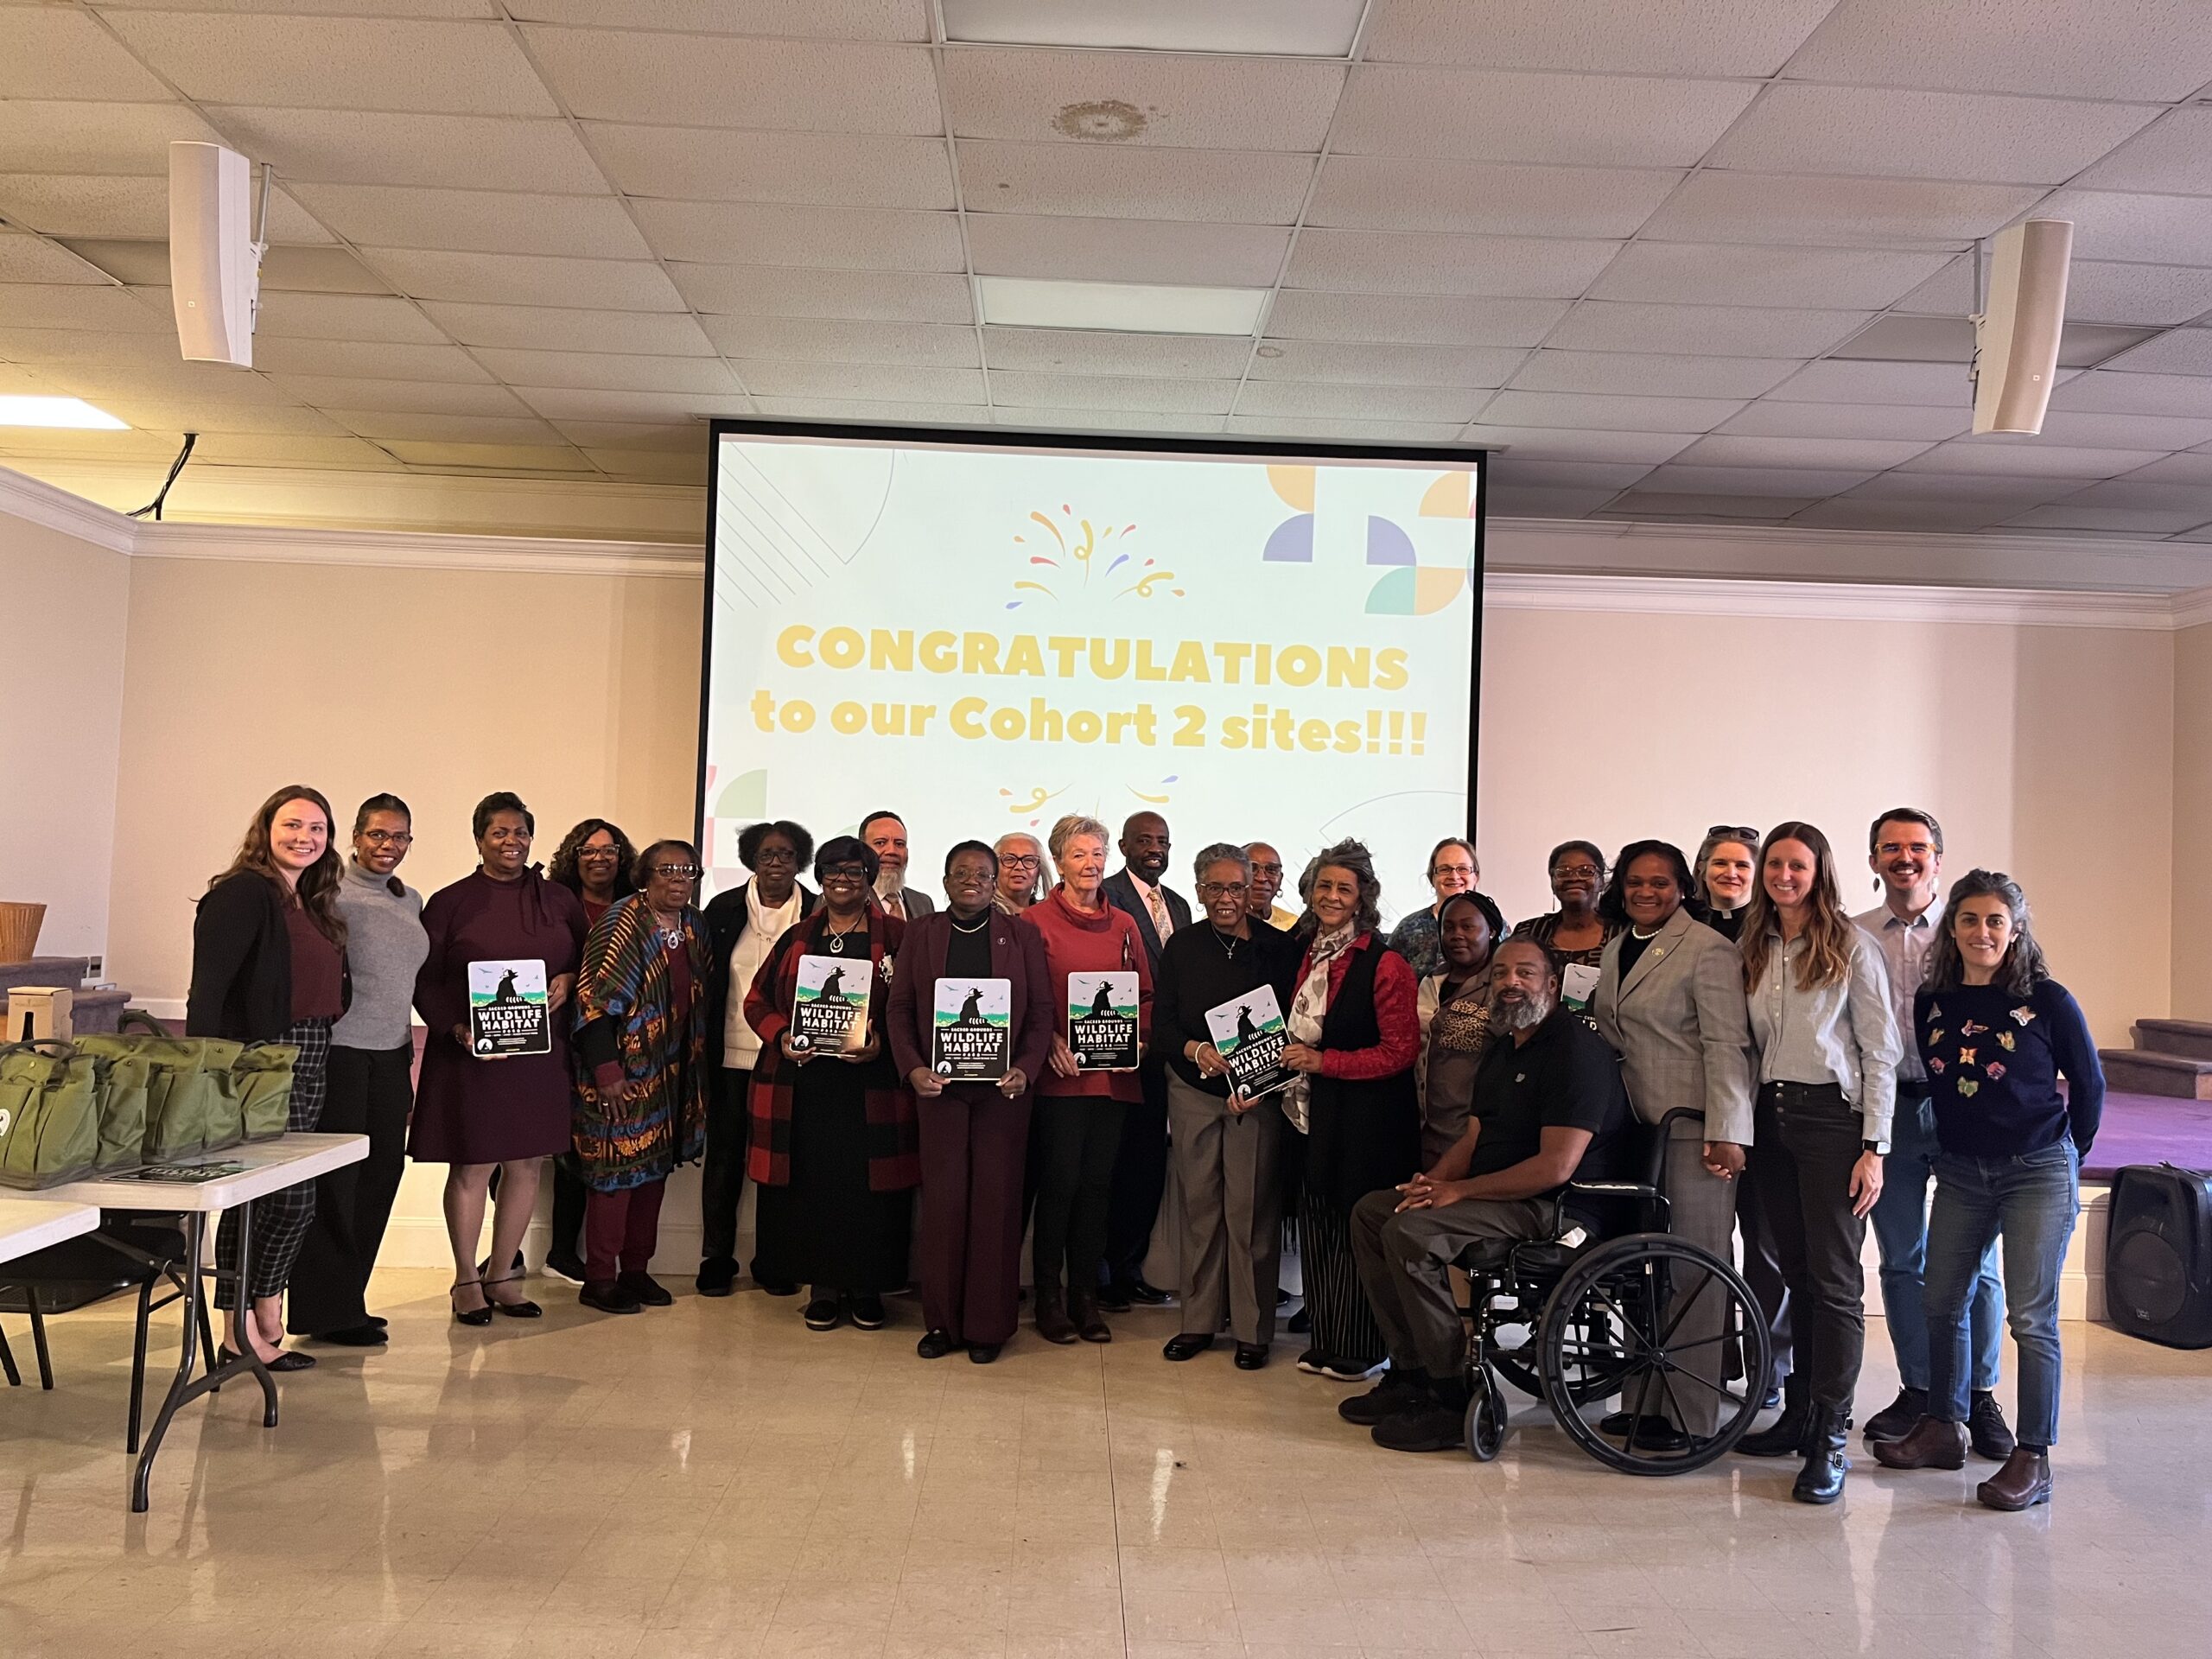 A large group of people pose for a photo indoors in front of a projector screen that reads, "Congratulations to our cohort 2 sites!!!".